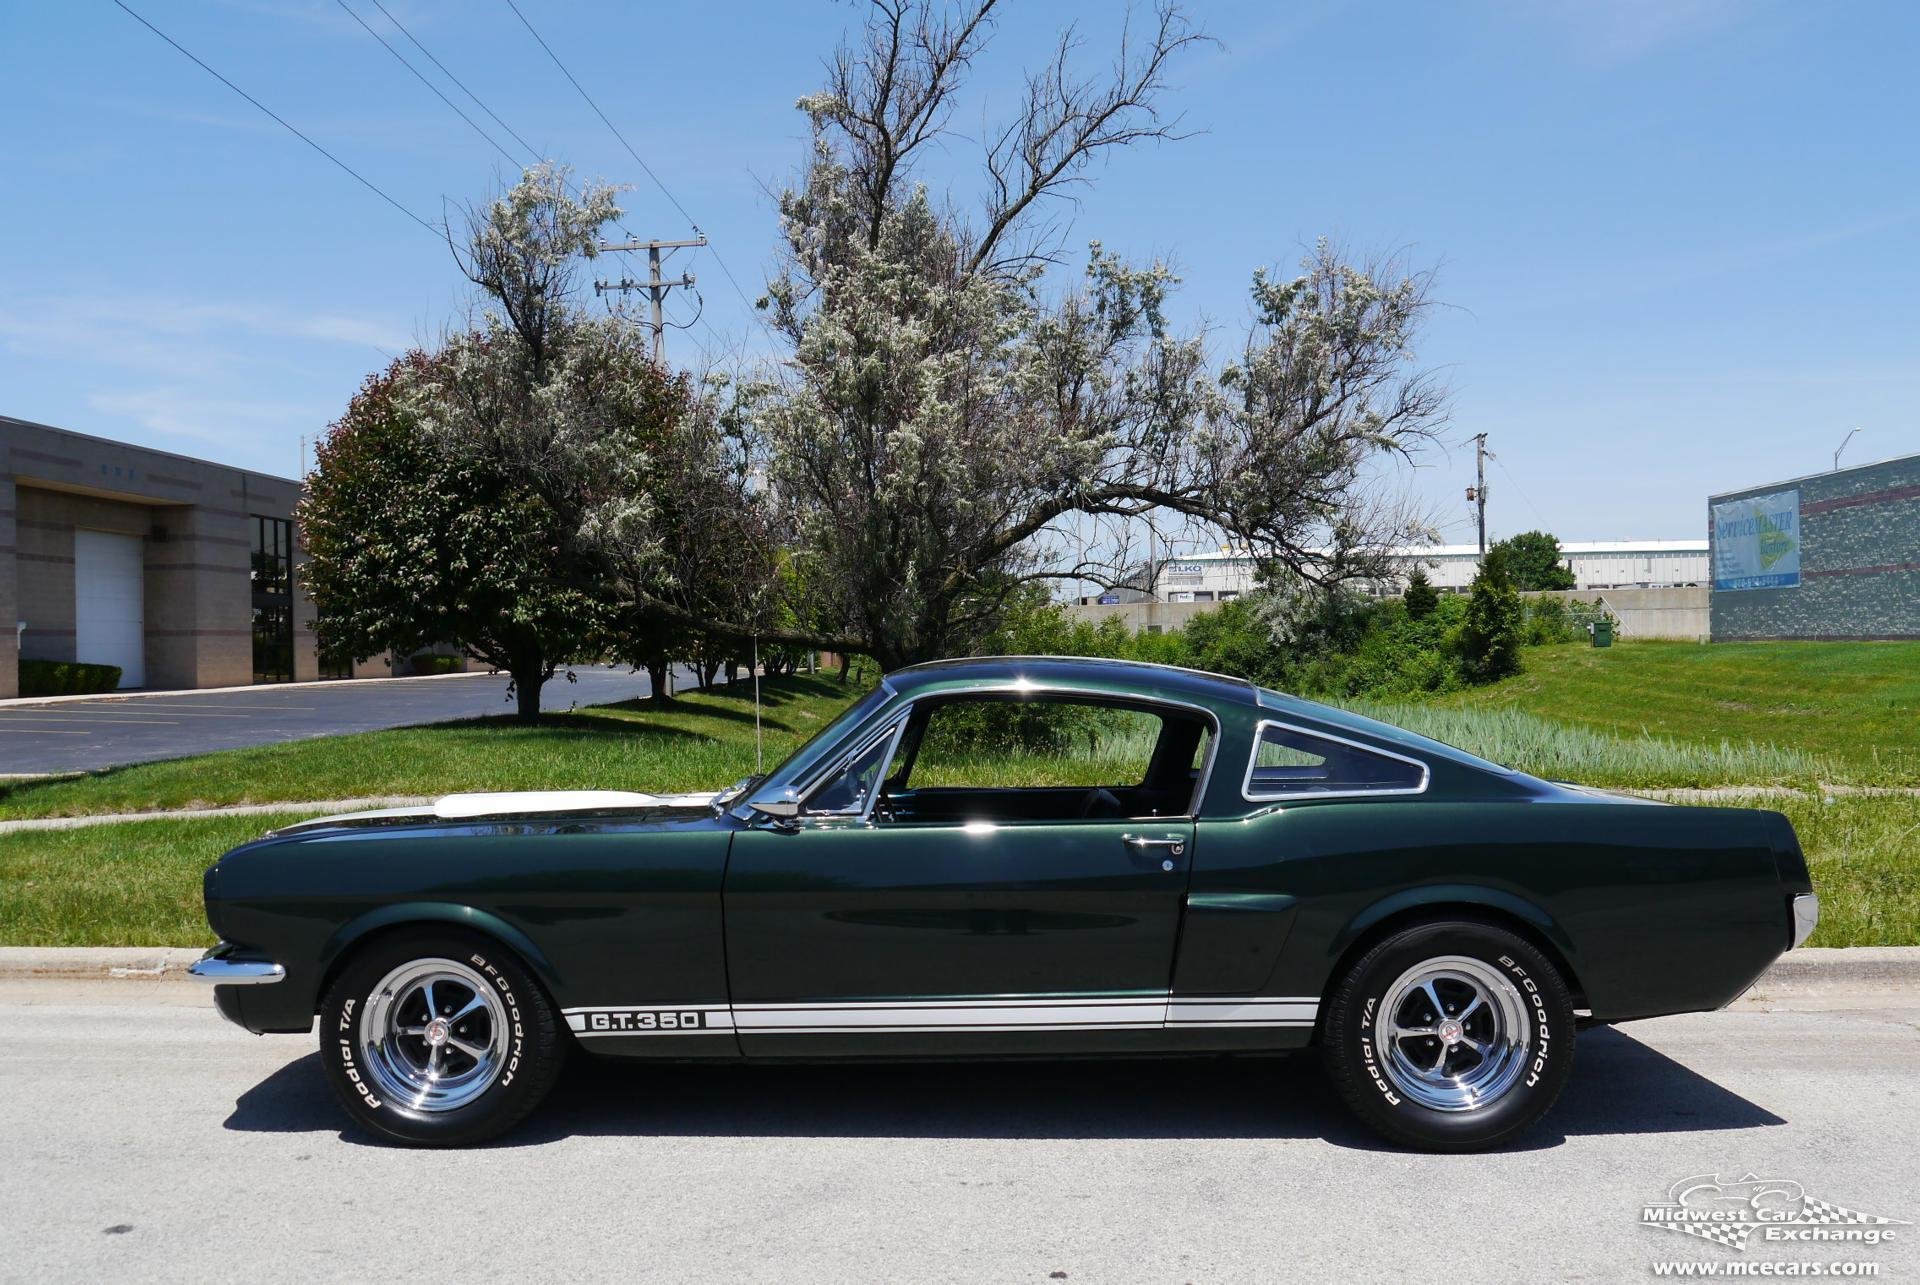 1965 ford mustang fastback w shelby gt350 appointments